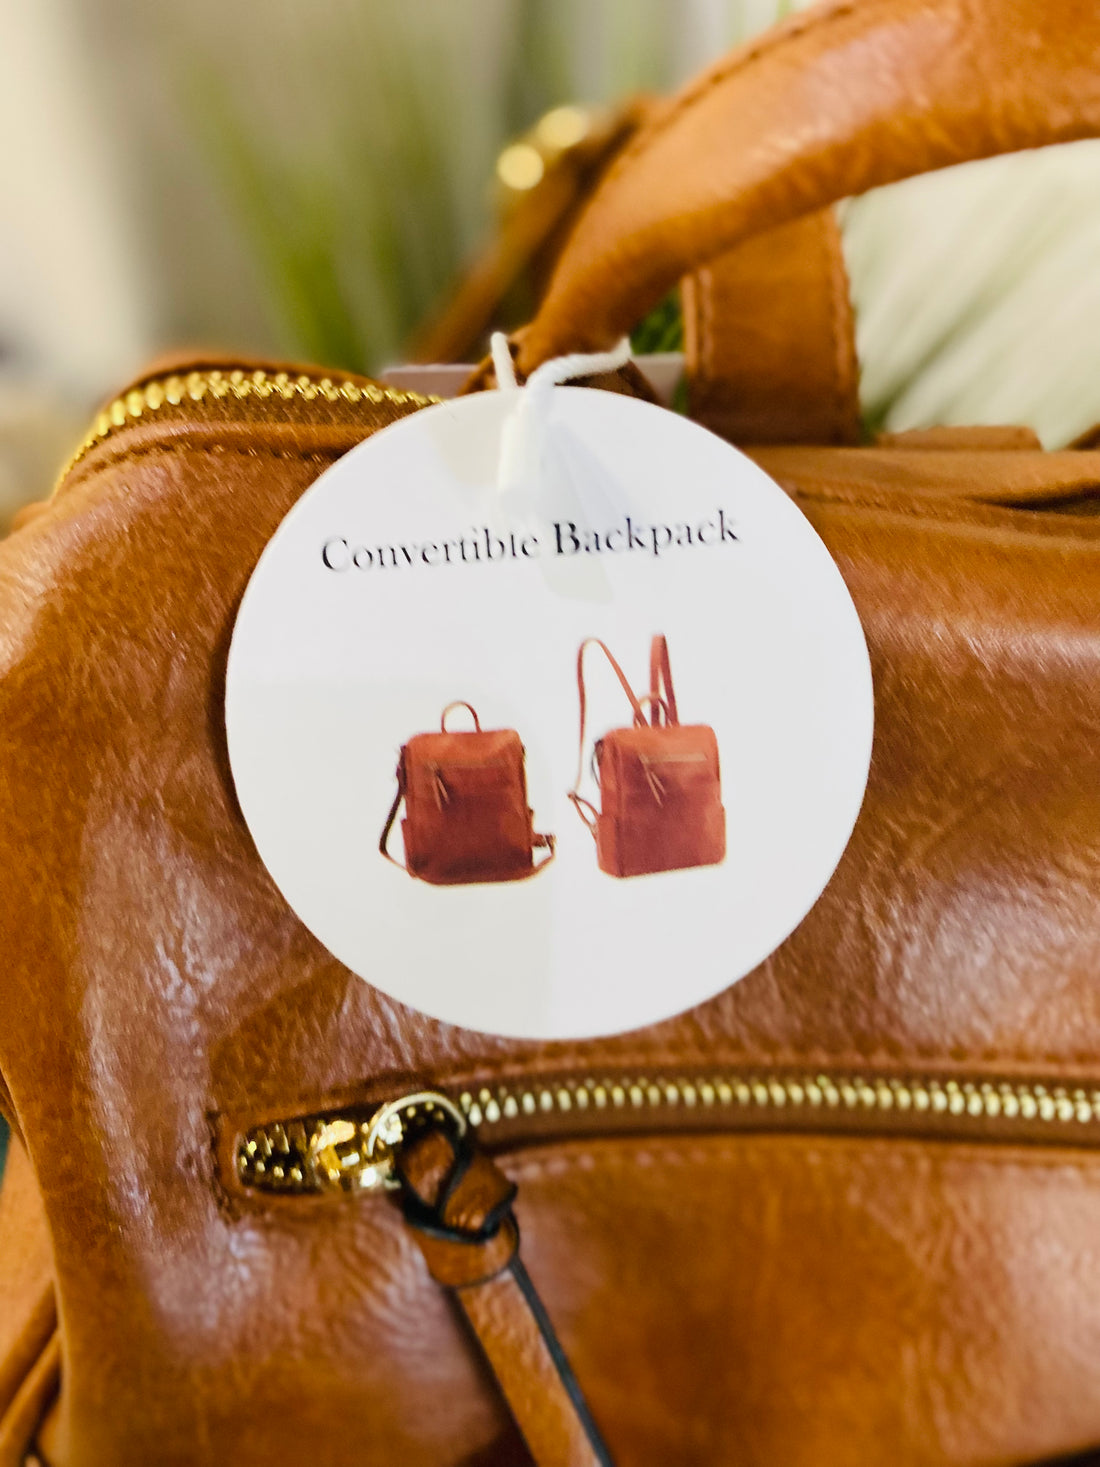 The Beth Convertible Backpack Purse